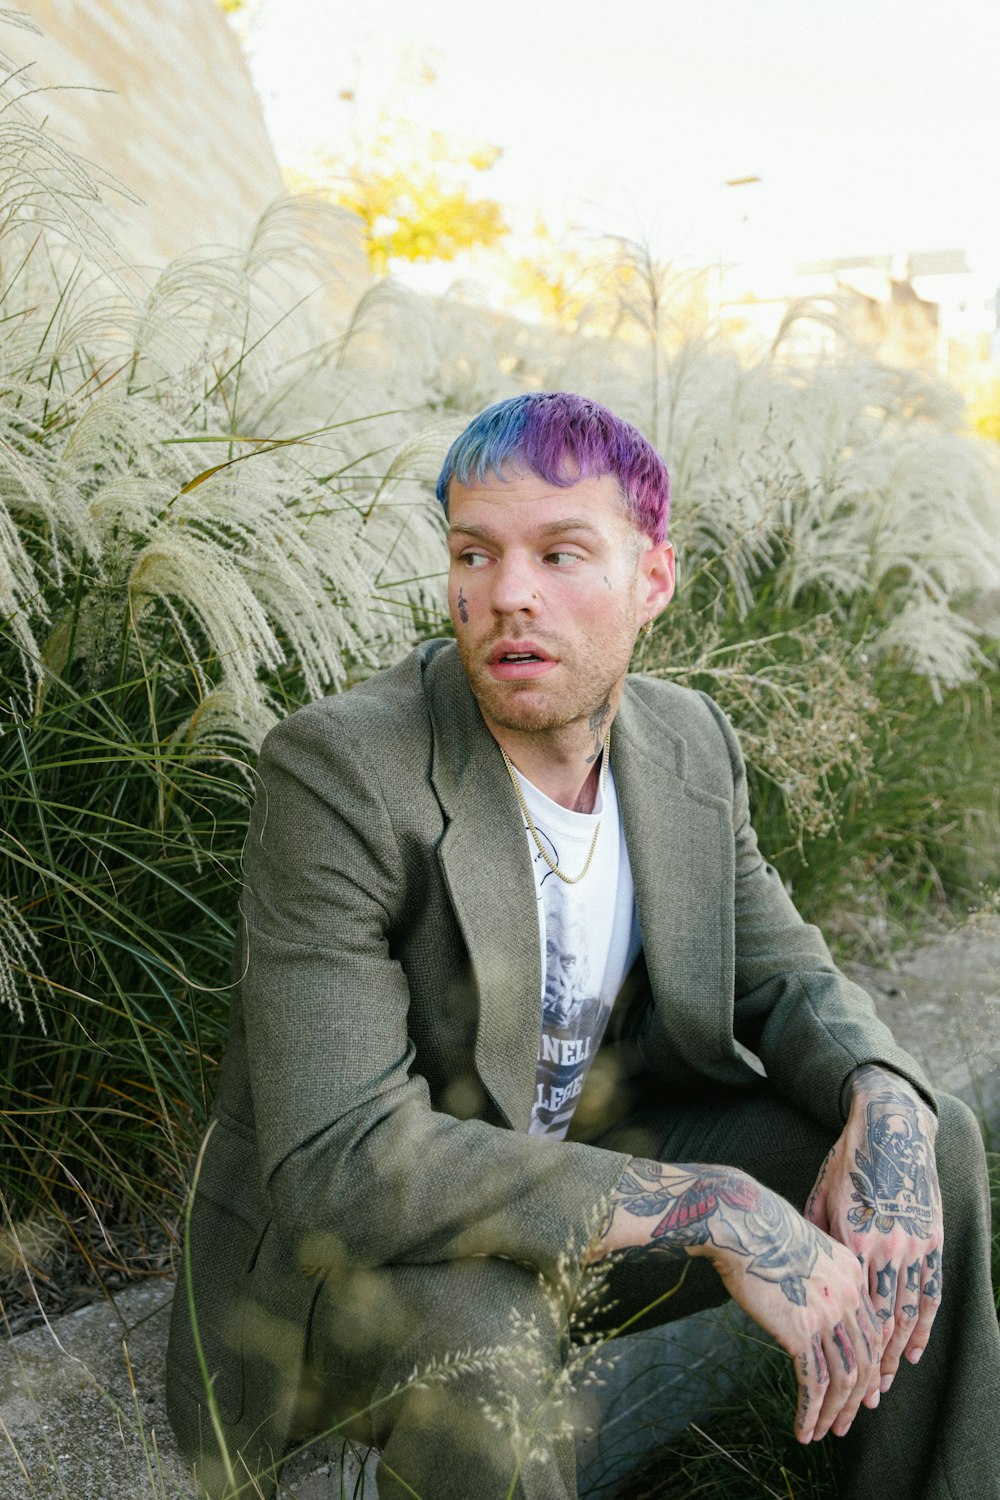 a man with purple hair sitting in a field